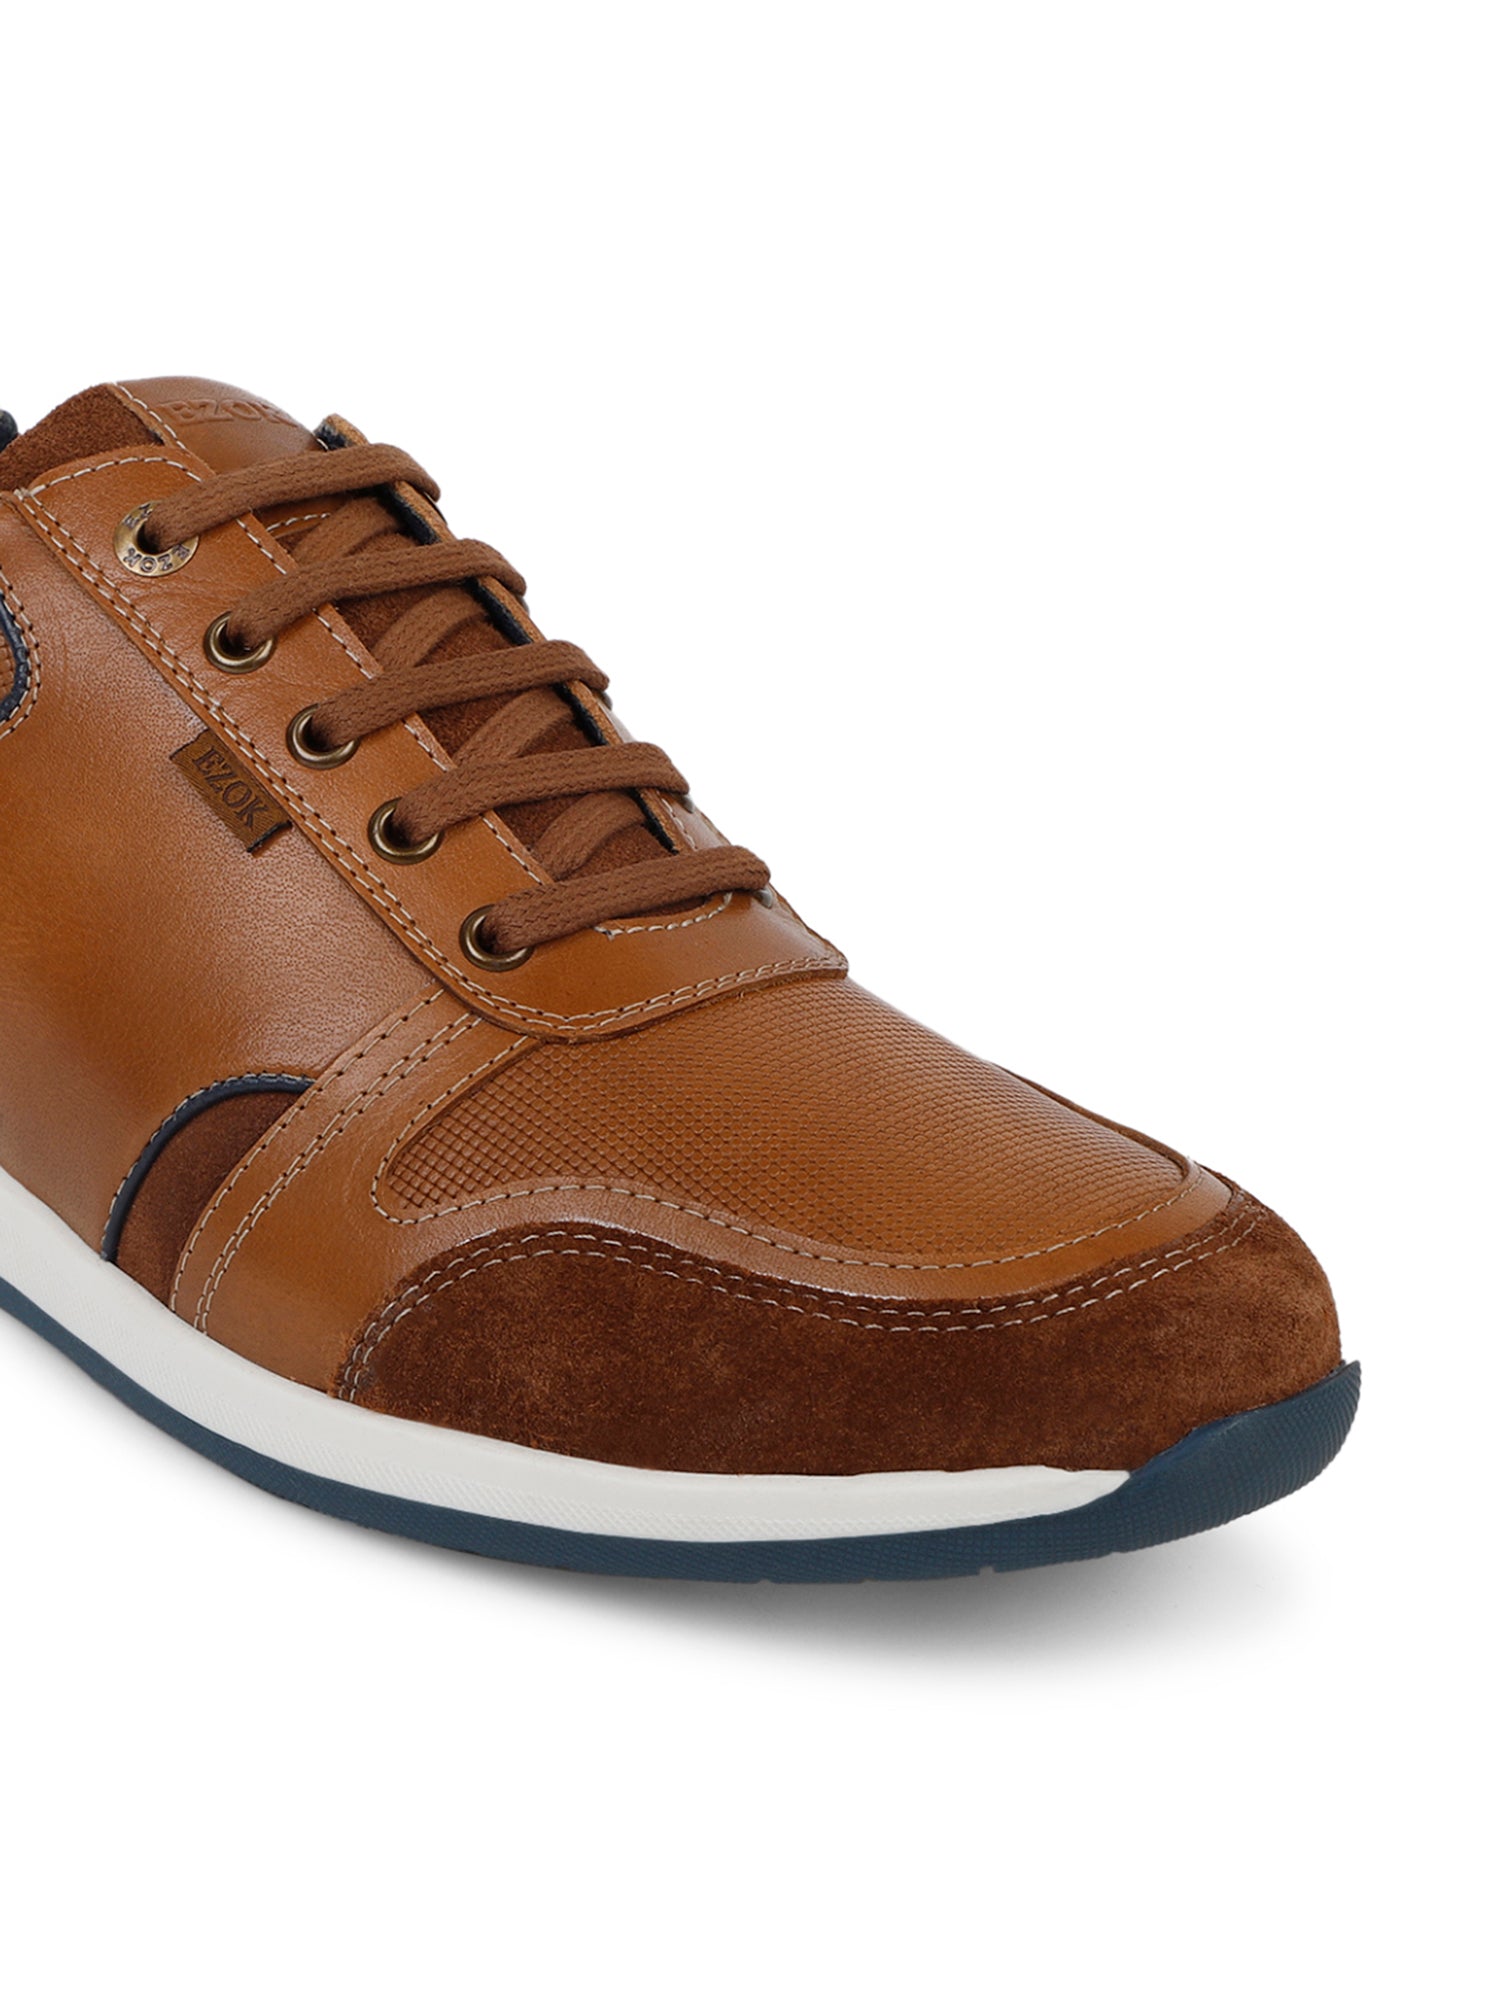 Men's - Tan - Brown - Leather - Cupsole Sneakers – LANX